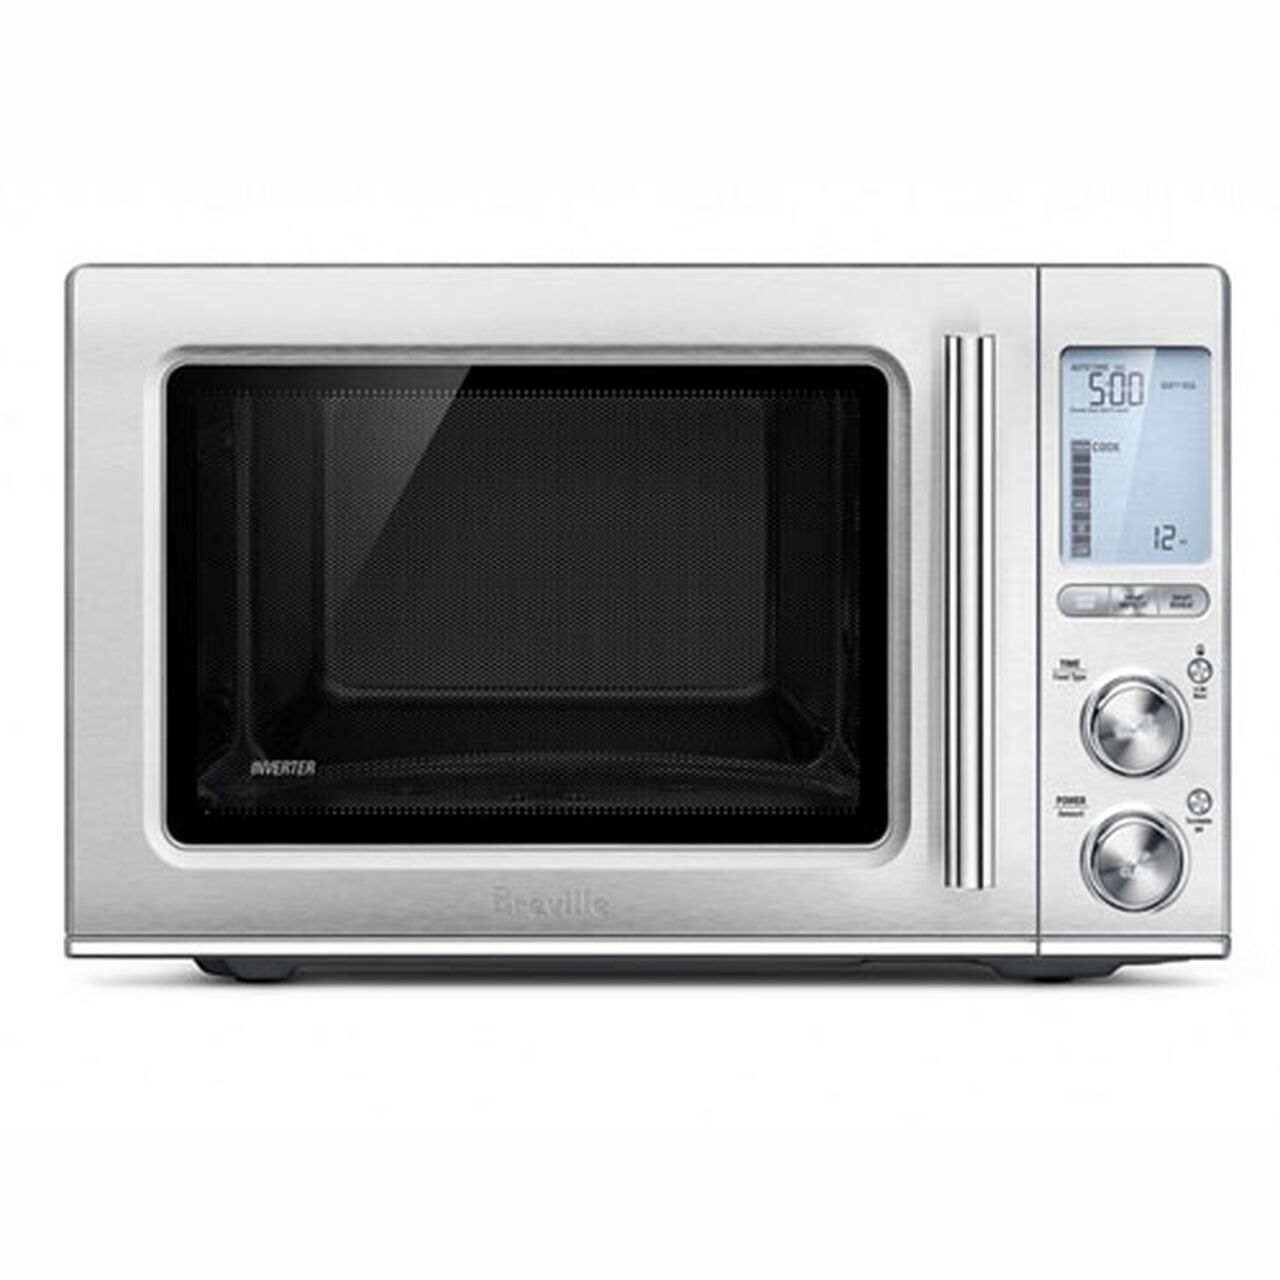 Breville Smooth Wave Microwave #BMO850, , large image number 0